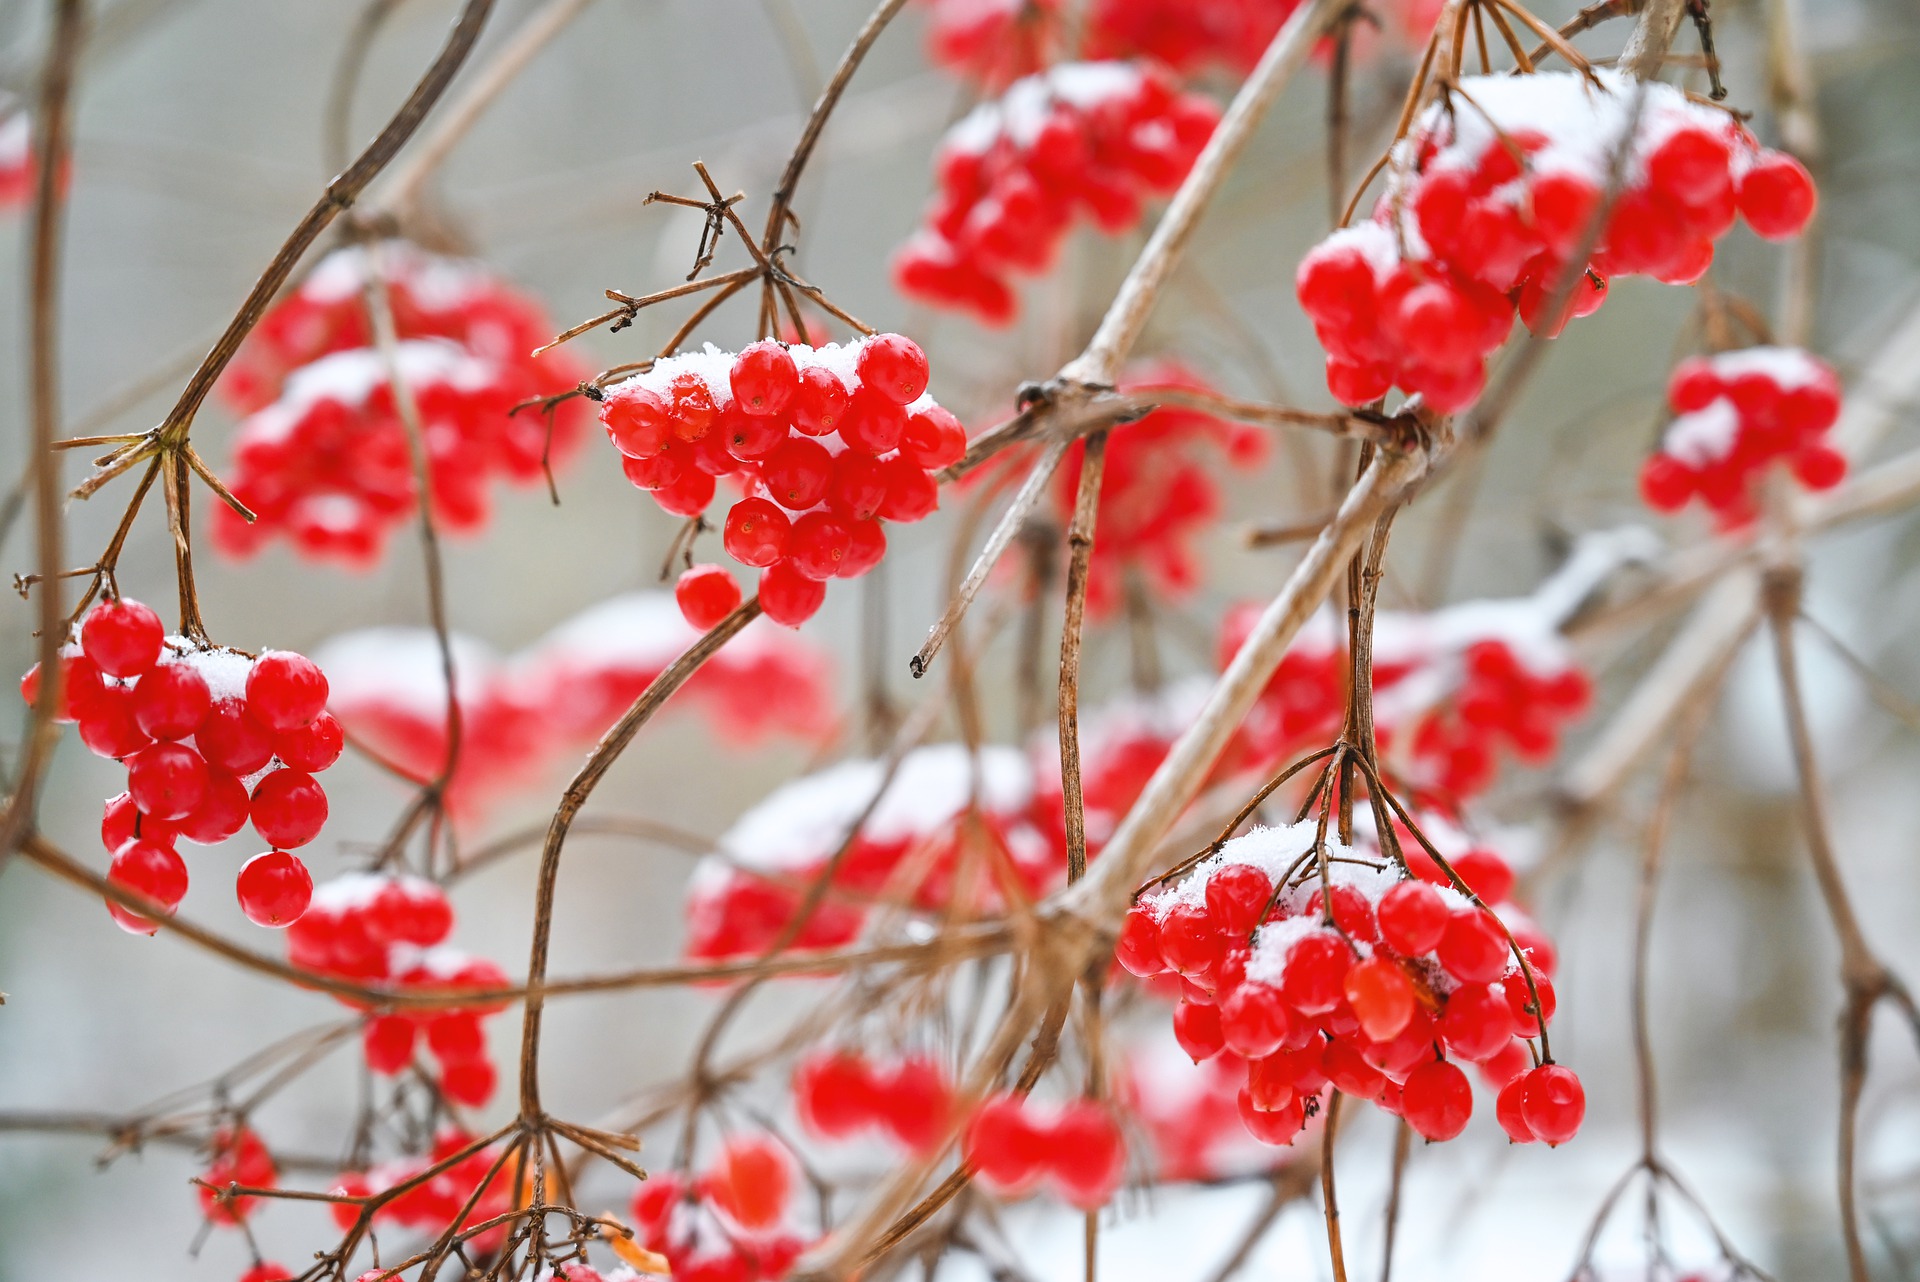 red-berry-g6f9ba998a_1920